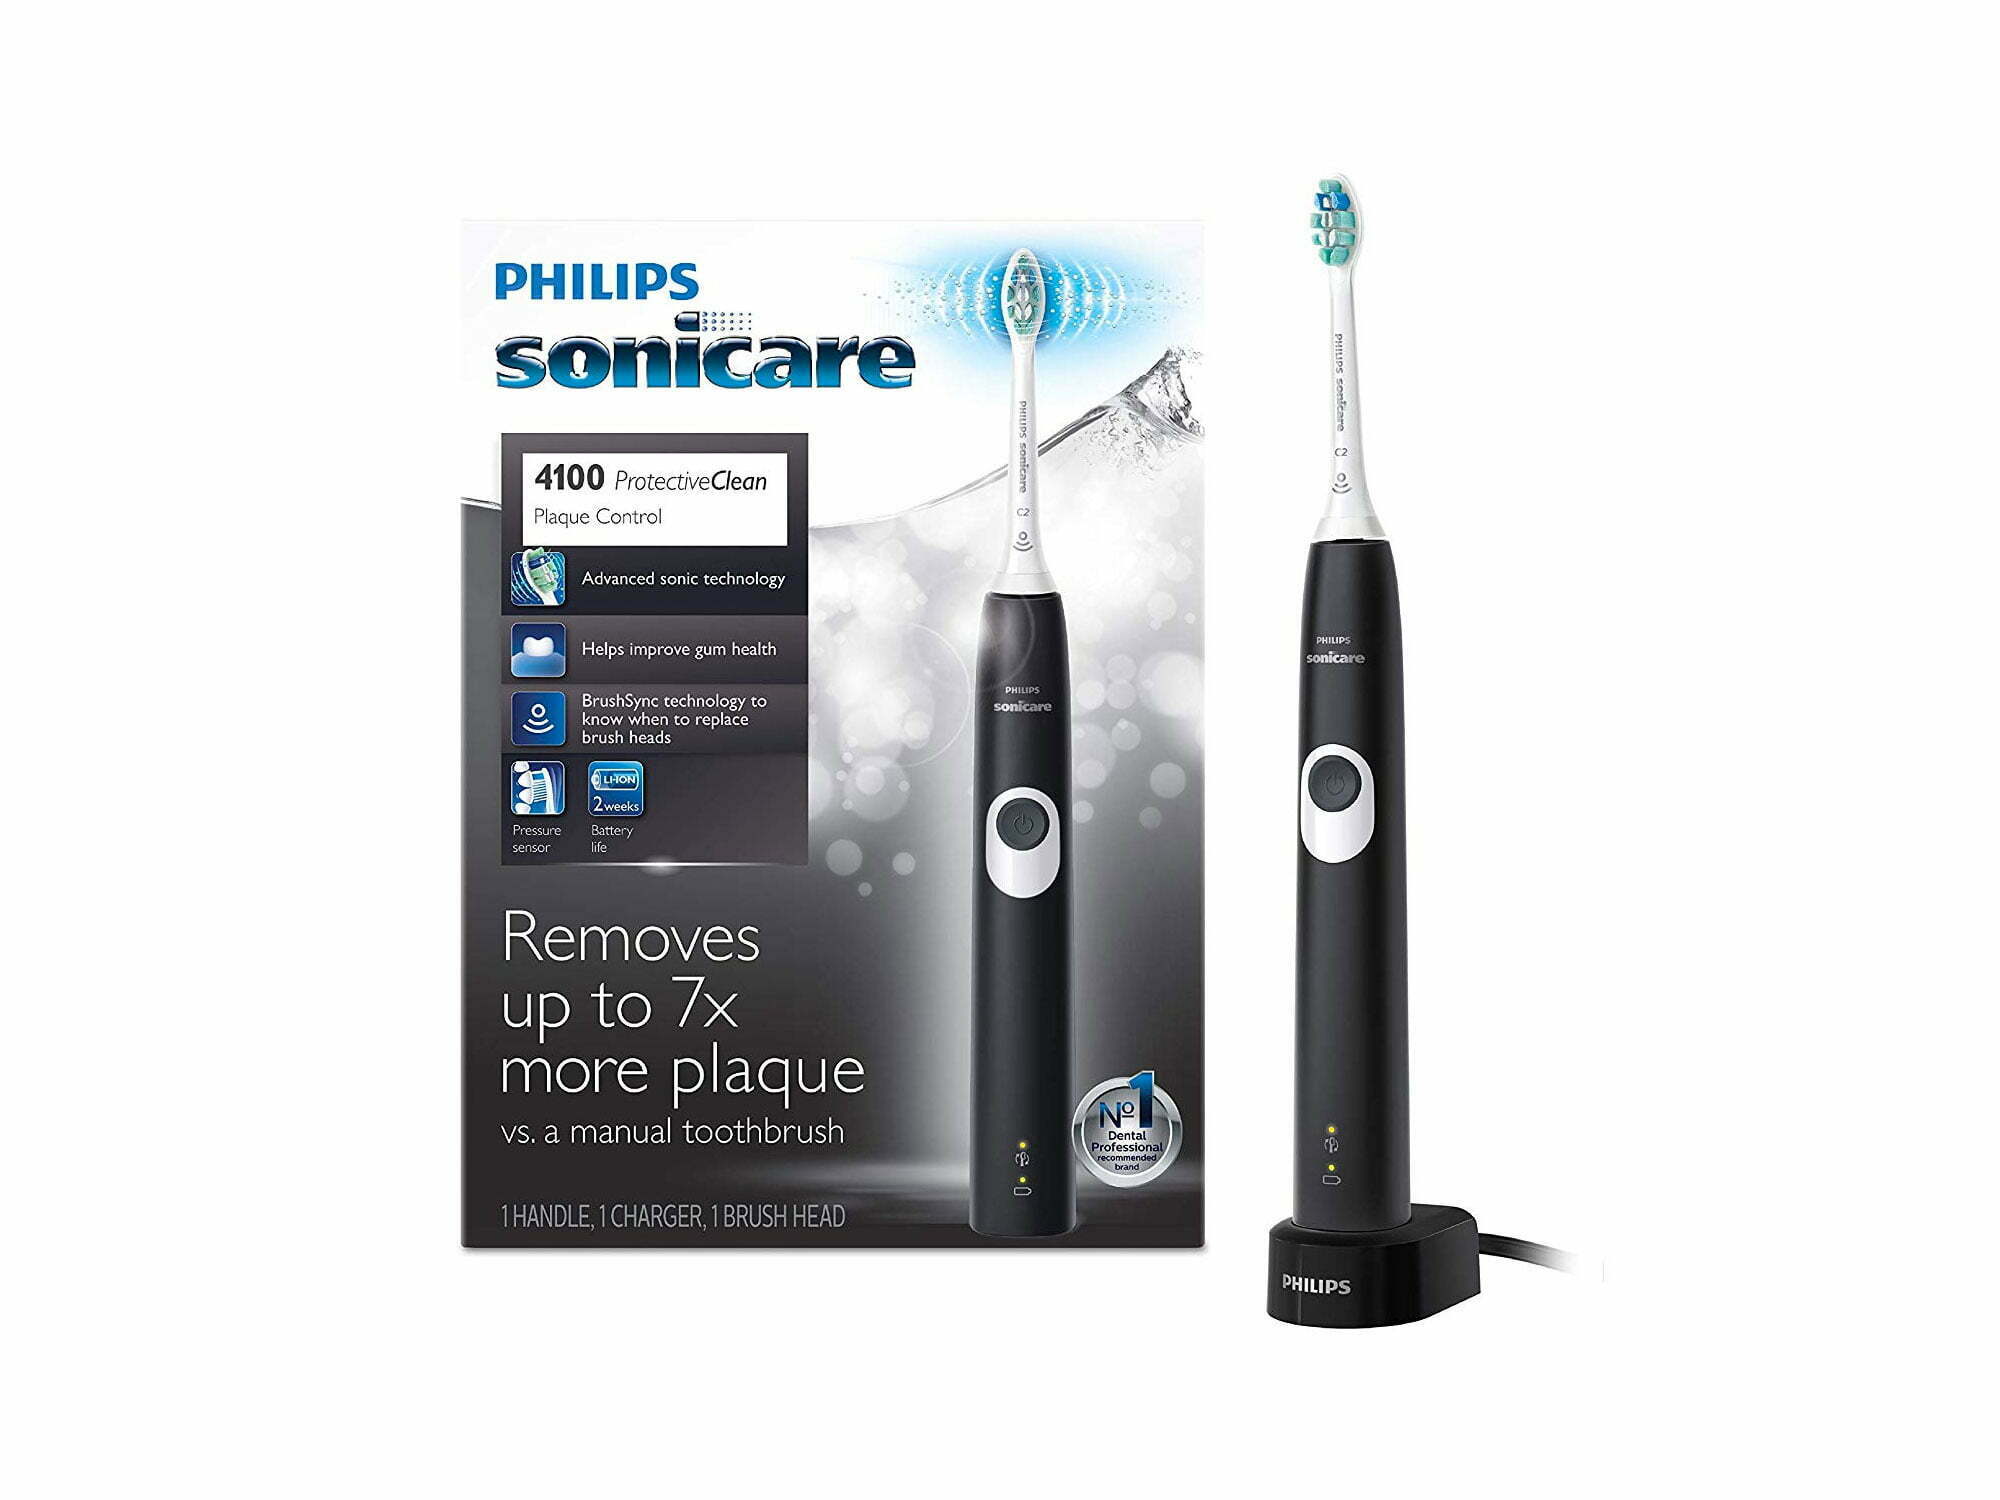 Philips Sonicare ProtectiveClean rechargeable electric toothbrush